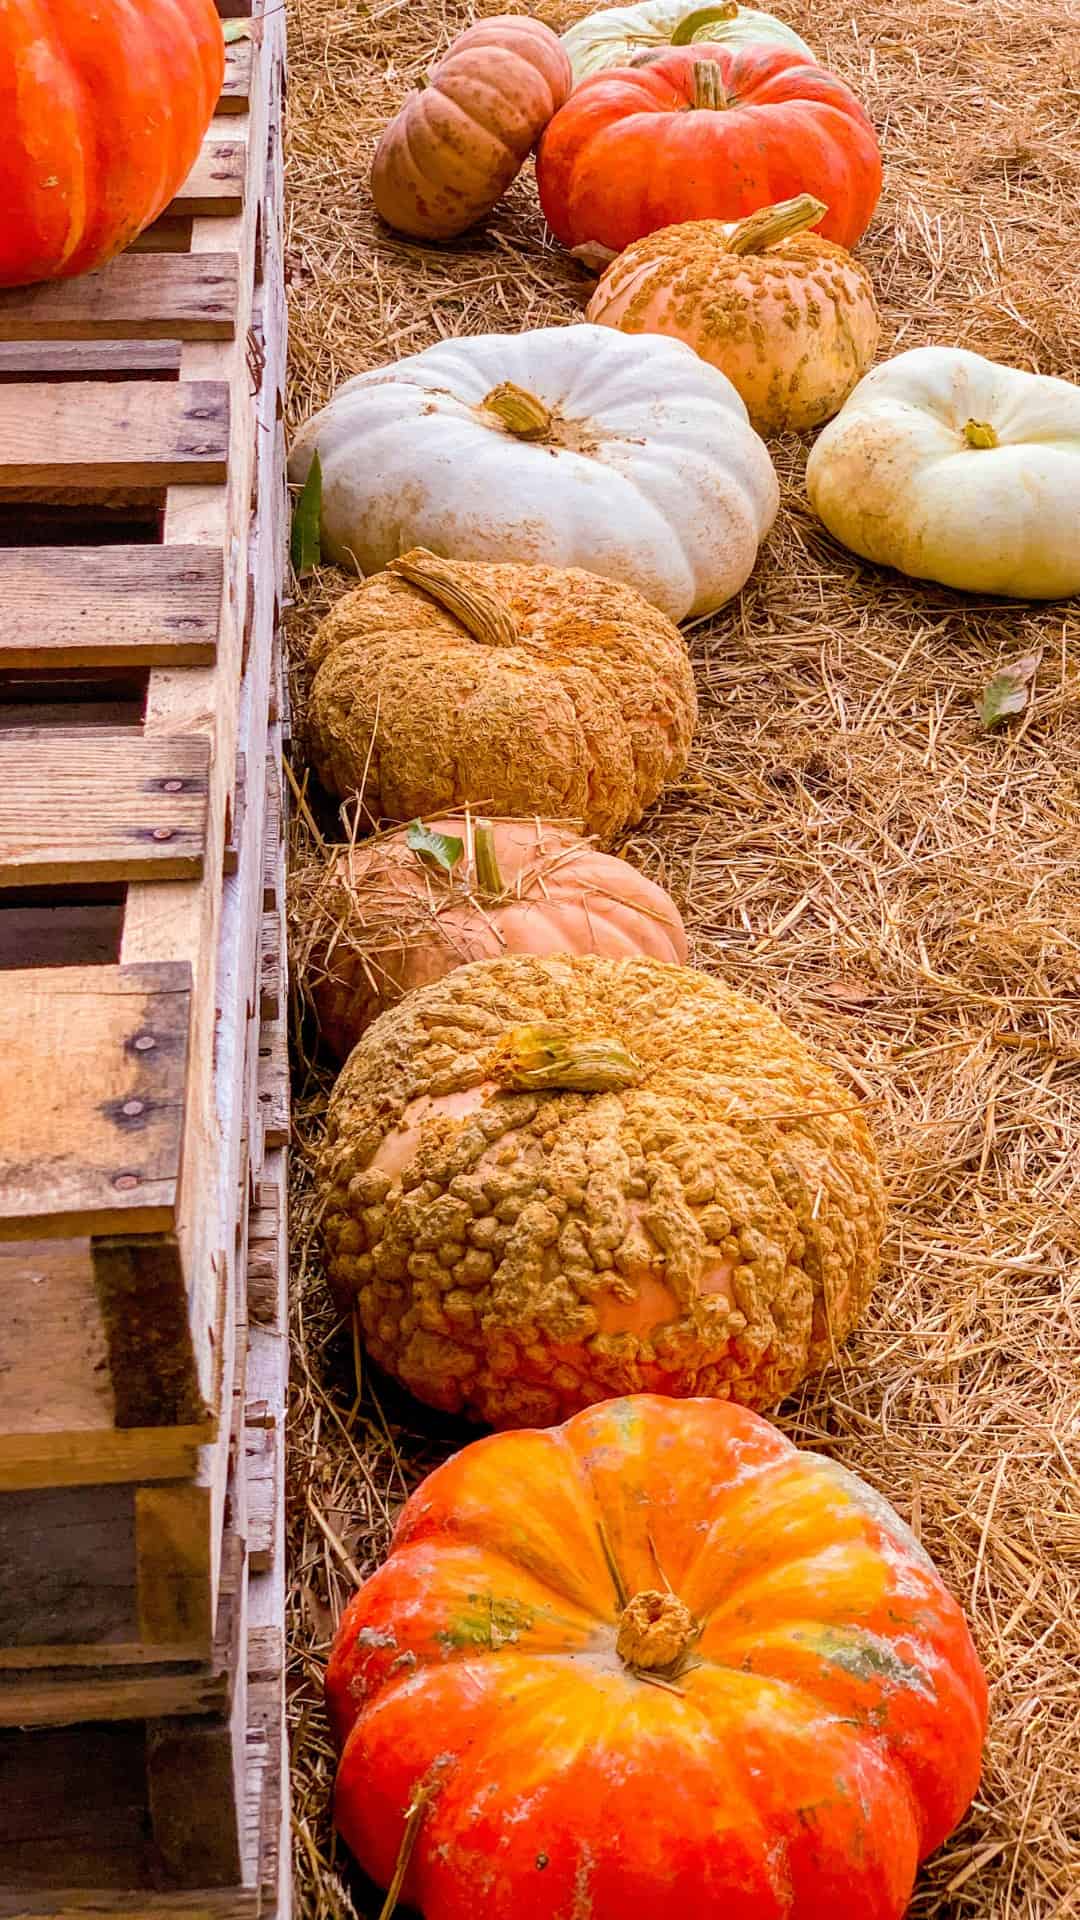 A pile of orange and white squashes - Fall